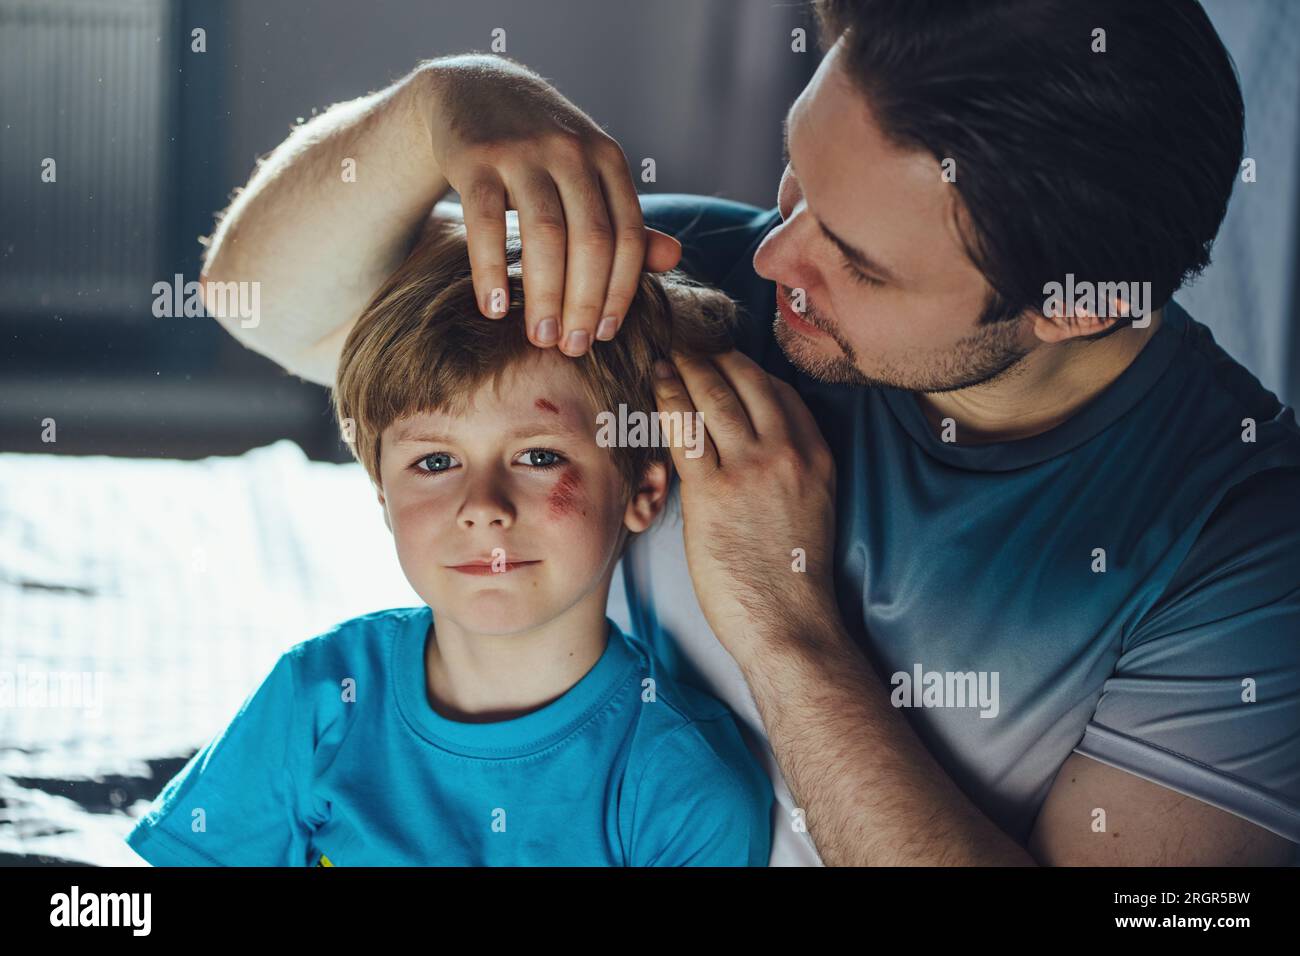 Father inspects his son with scratches on his face after fall Stock Photo